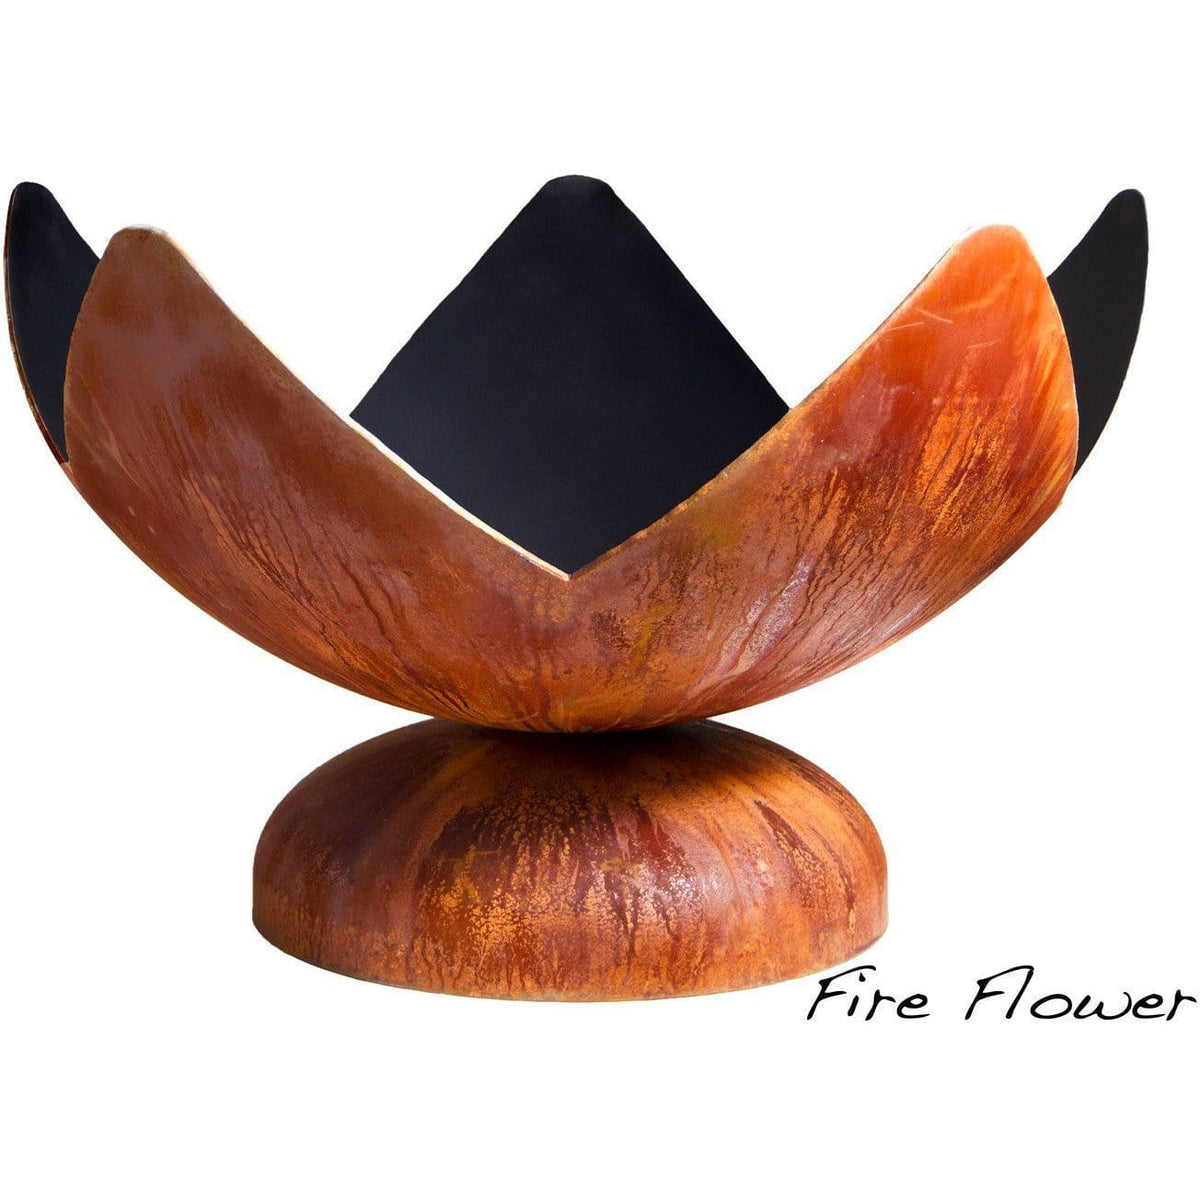 Fire Flower Artisan Fire Bowl by Ohio Flame